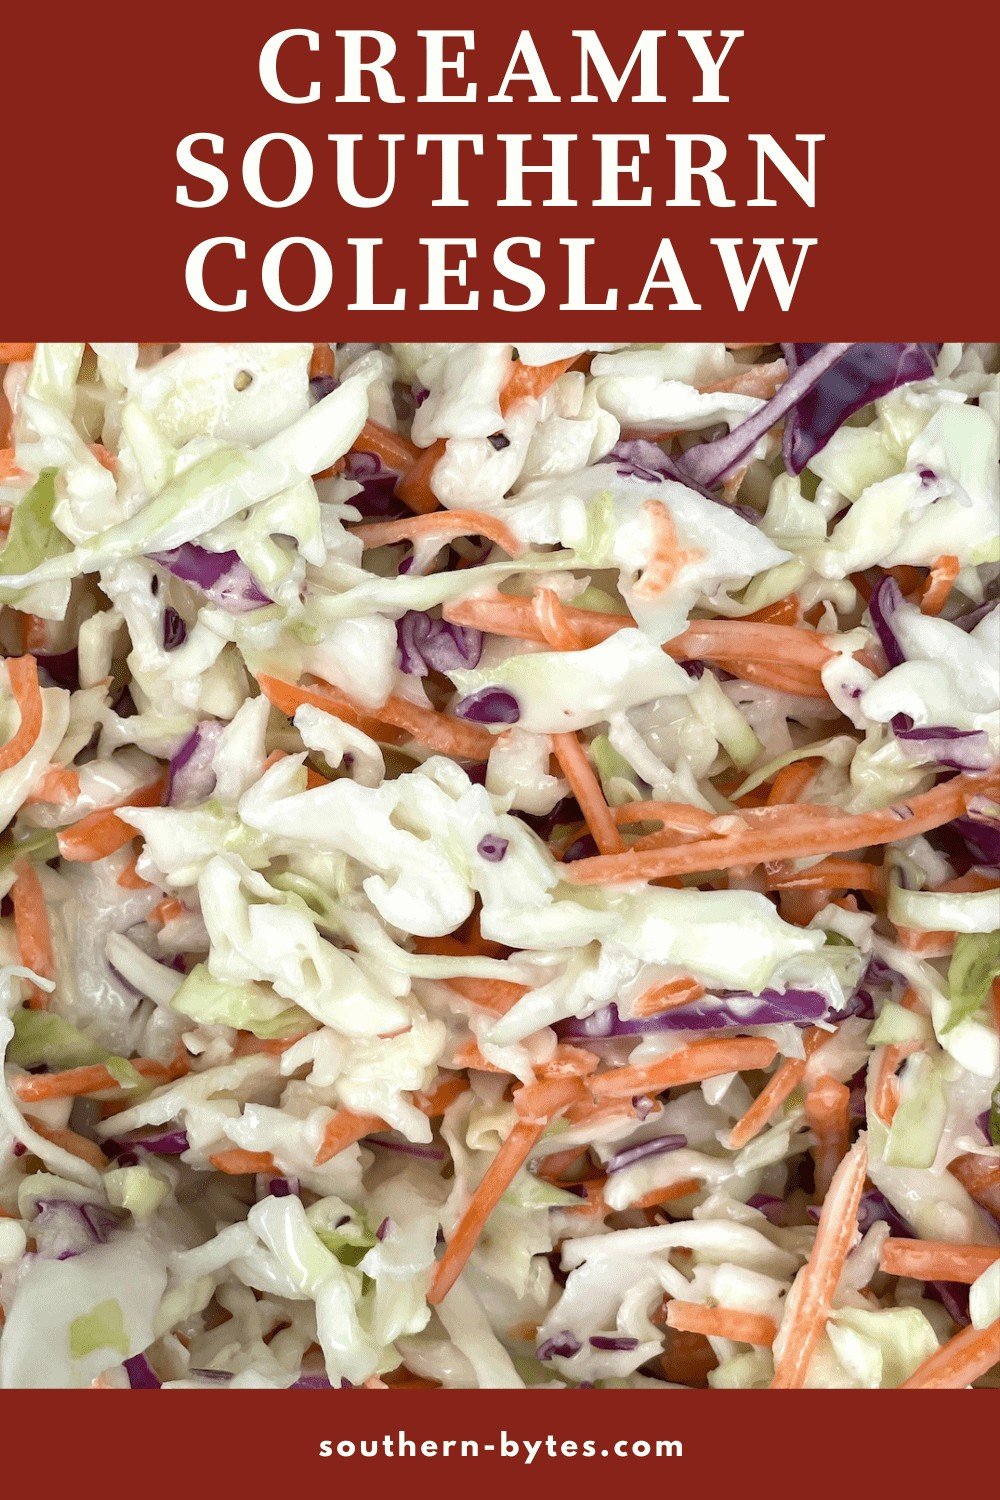 A pin image of creamy southern coleslaw (shredded carrots & cabbage covered in mayonnaise) up close.